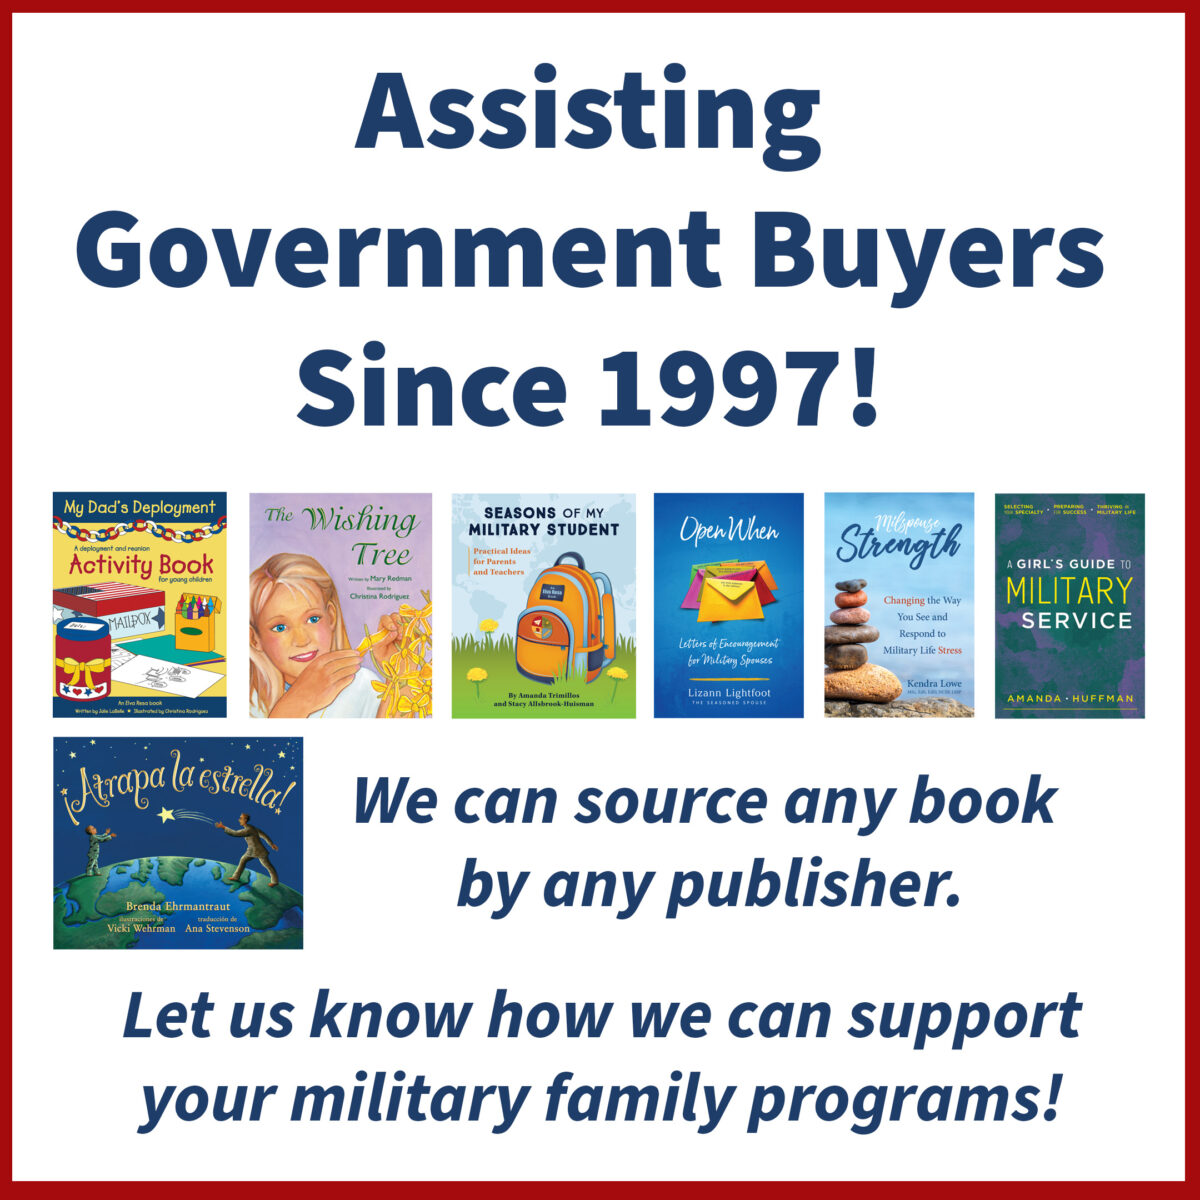 Elva Resa and Military Family Books has been assisting government buyers since 1997